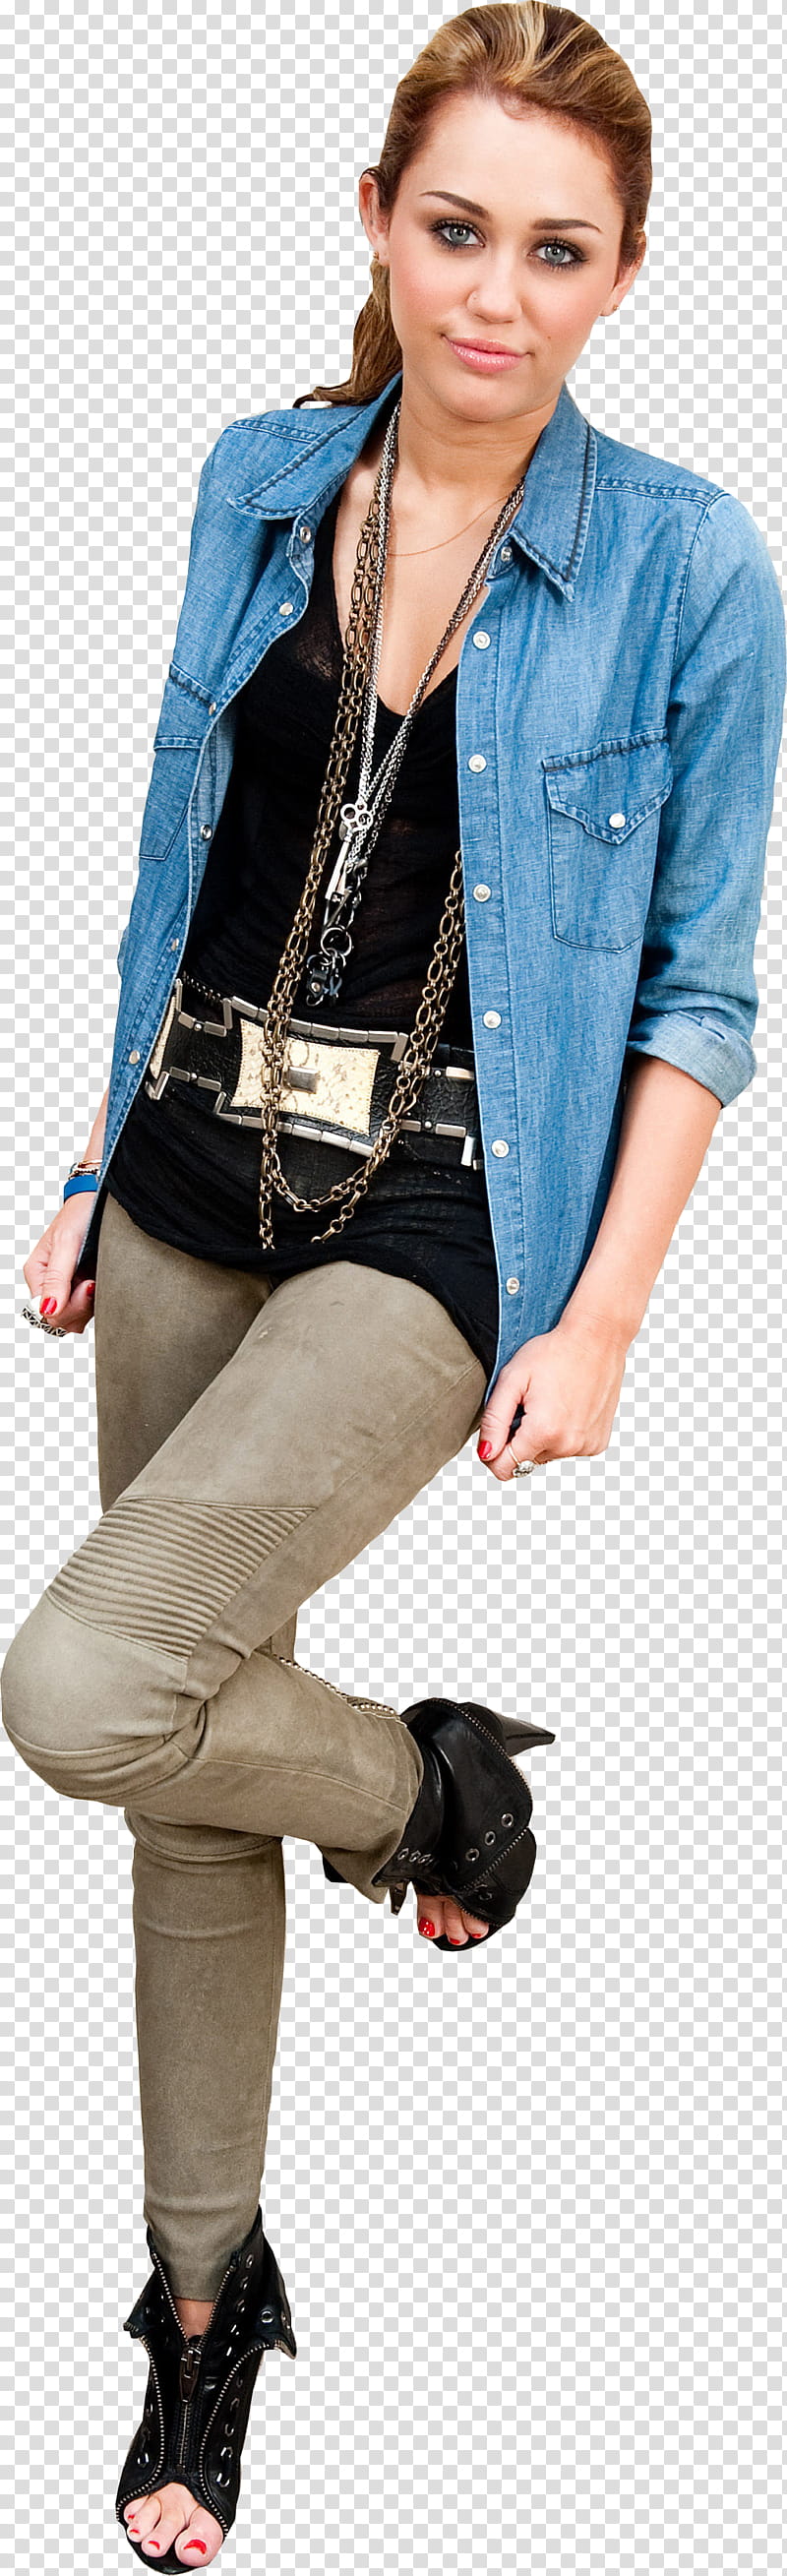 x Miley Cyrus s, woman wearing blue jacket transparent background PNG clipart